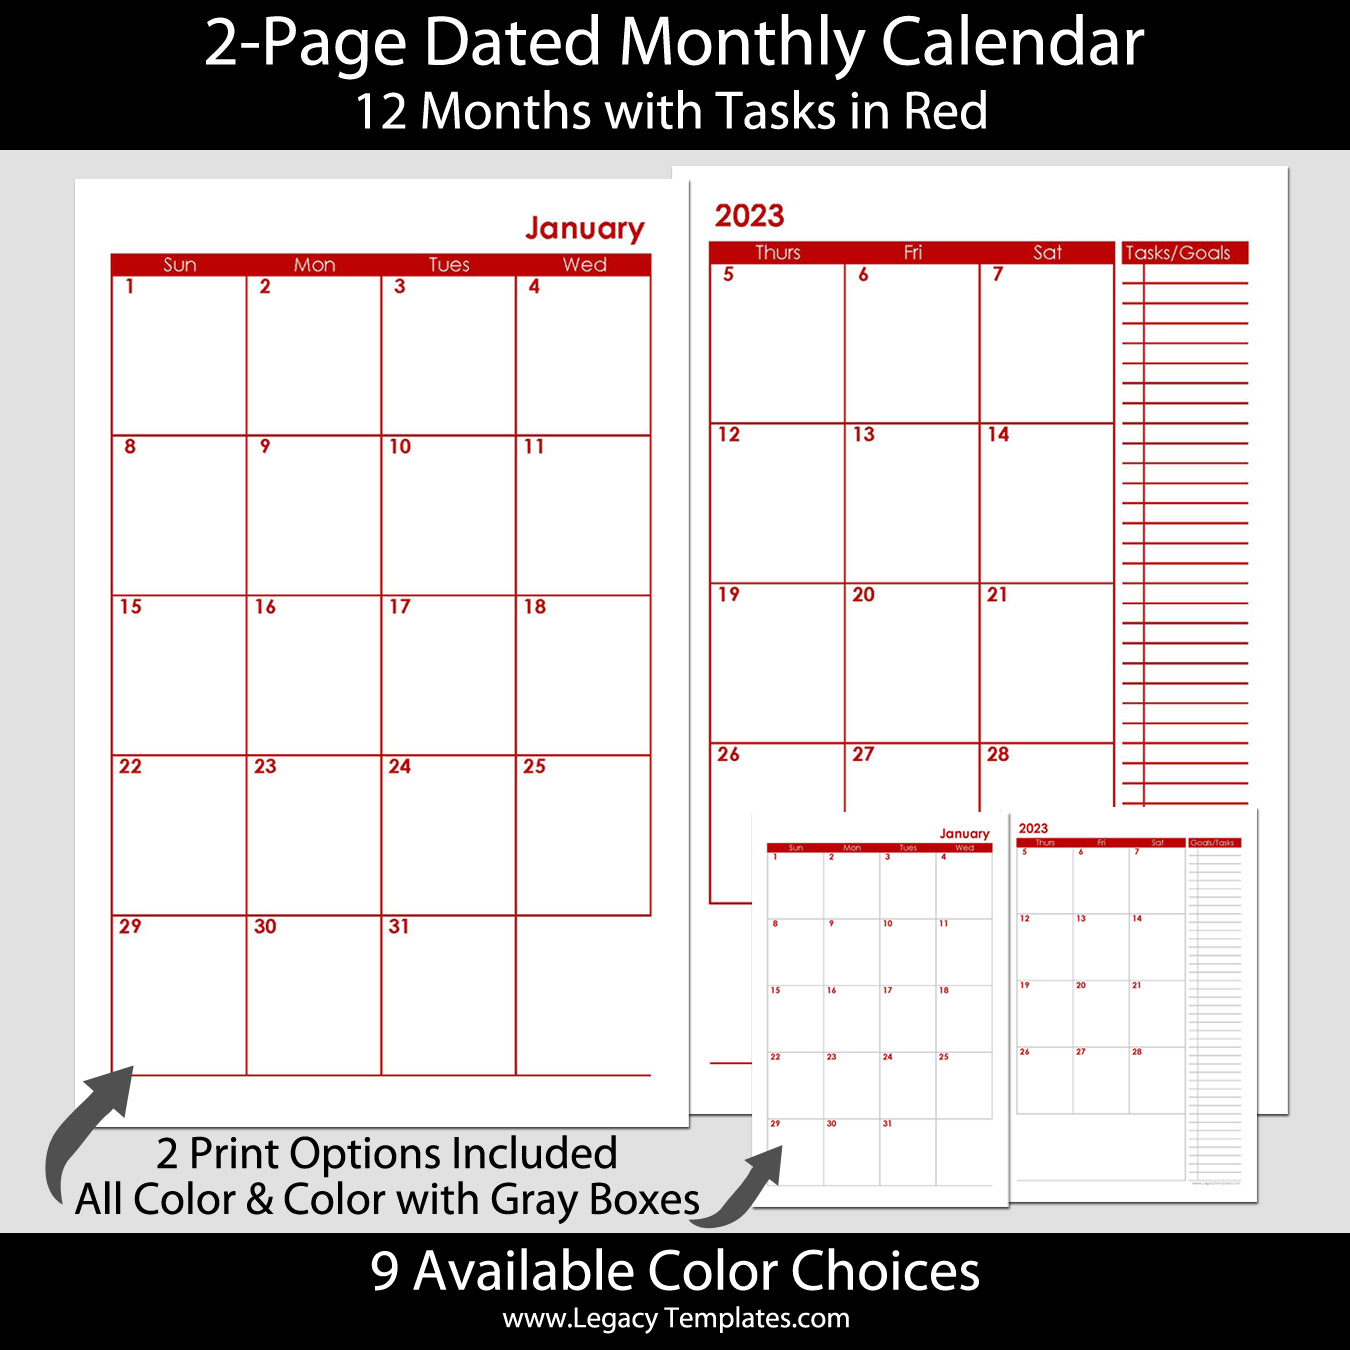 2Page Dated Monthly Calendar In Red 5.5 X 8.5 | Legacy within 5.5 X 8.5 Calendar Template